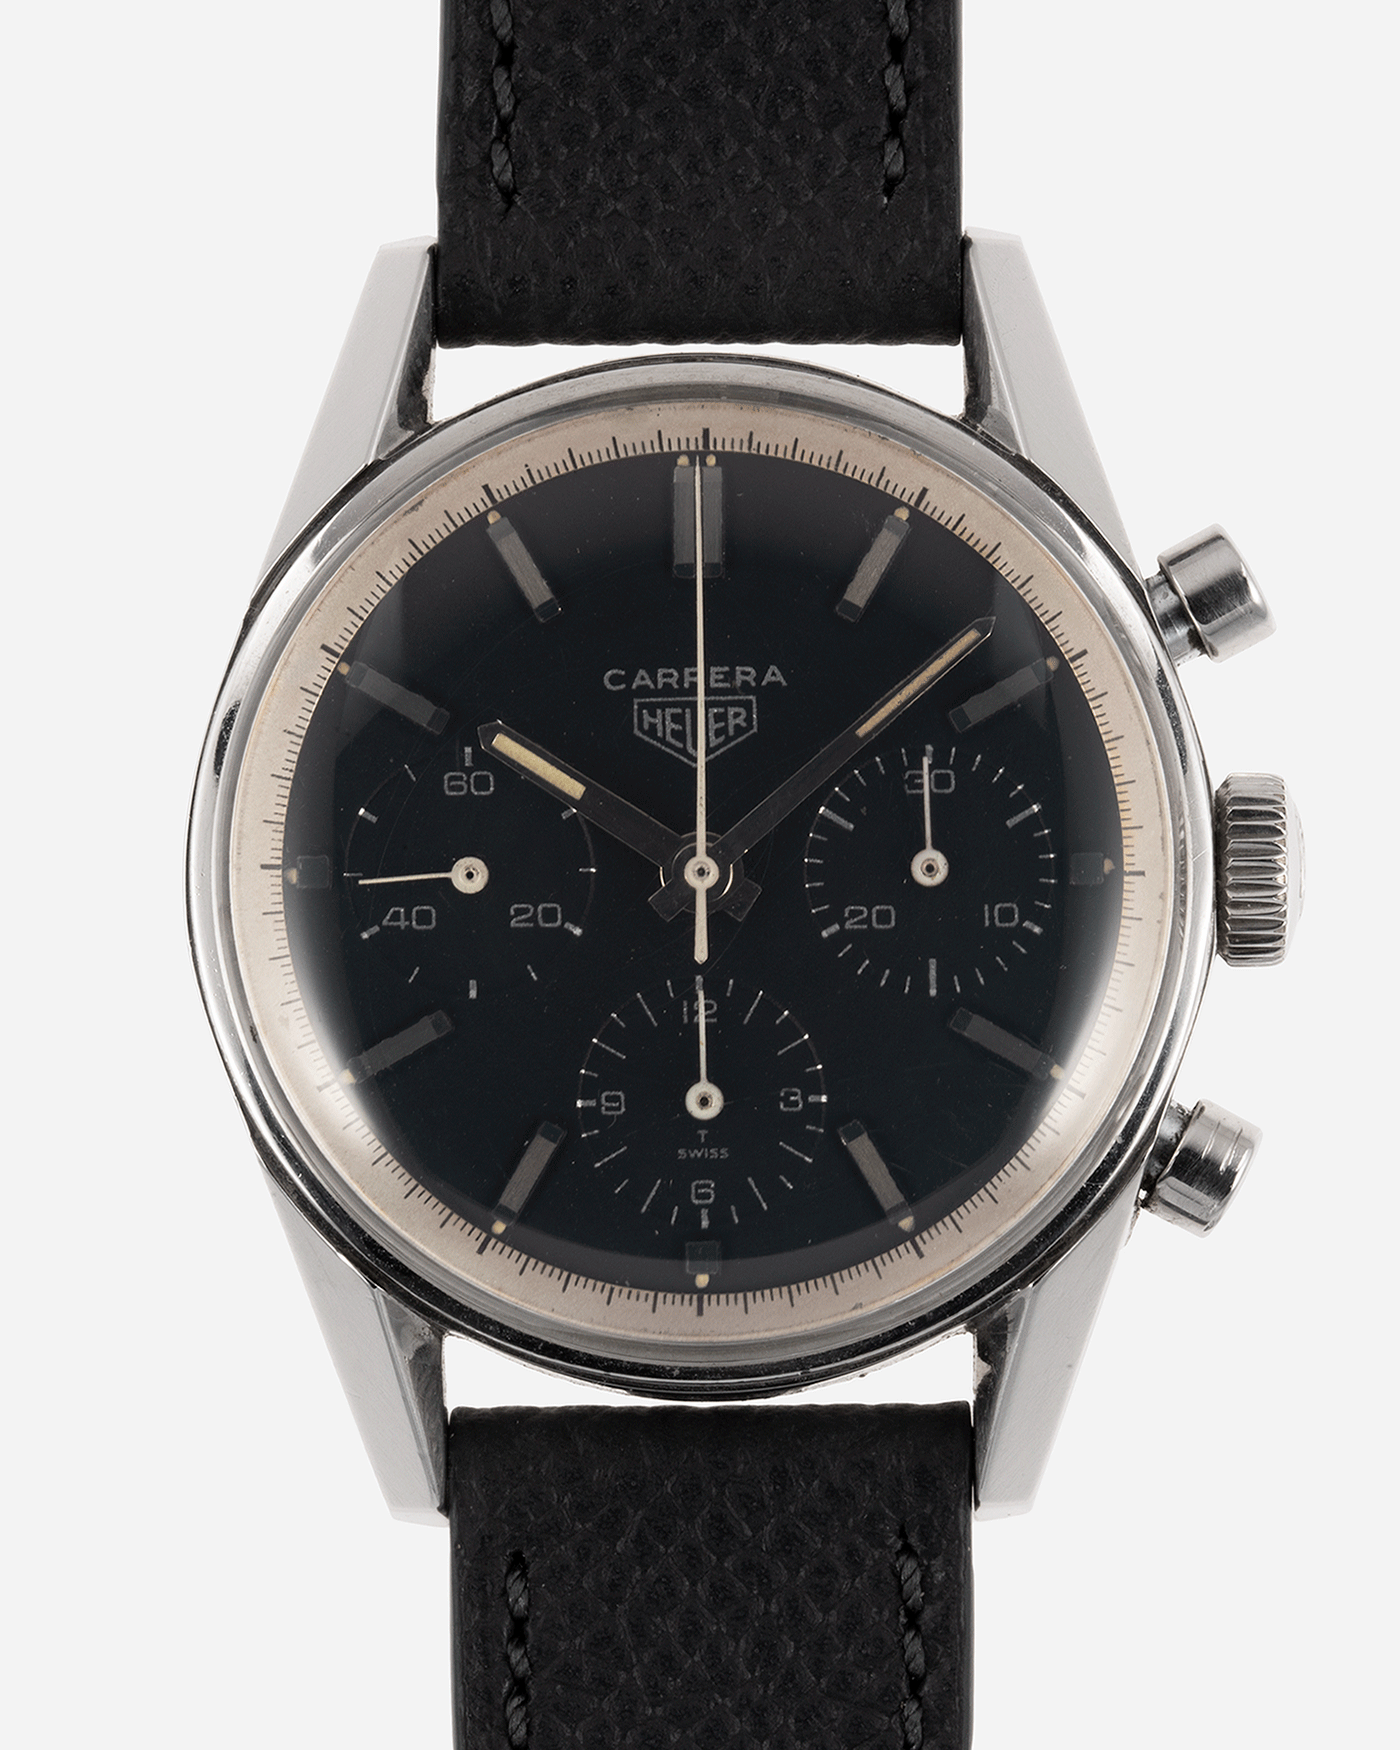 Brand: Heuer Year: 1960’s Model: Carrera Reference Number: 2447N Serial Number: 78XXX Material: Stainless Steel Movement: Valjoux 72 Case Diameter: 36mm Lug Width: 18mm Bracelet/Strap: Molequin Anthracite Textured Calf with Stainless Steel Tang Buckle